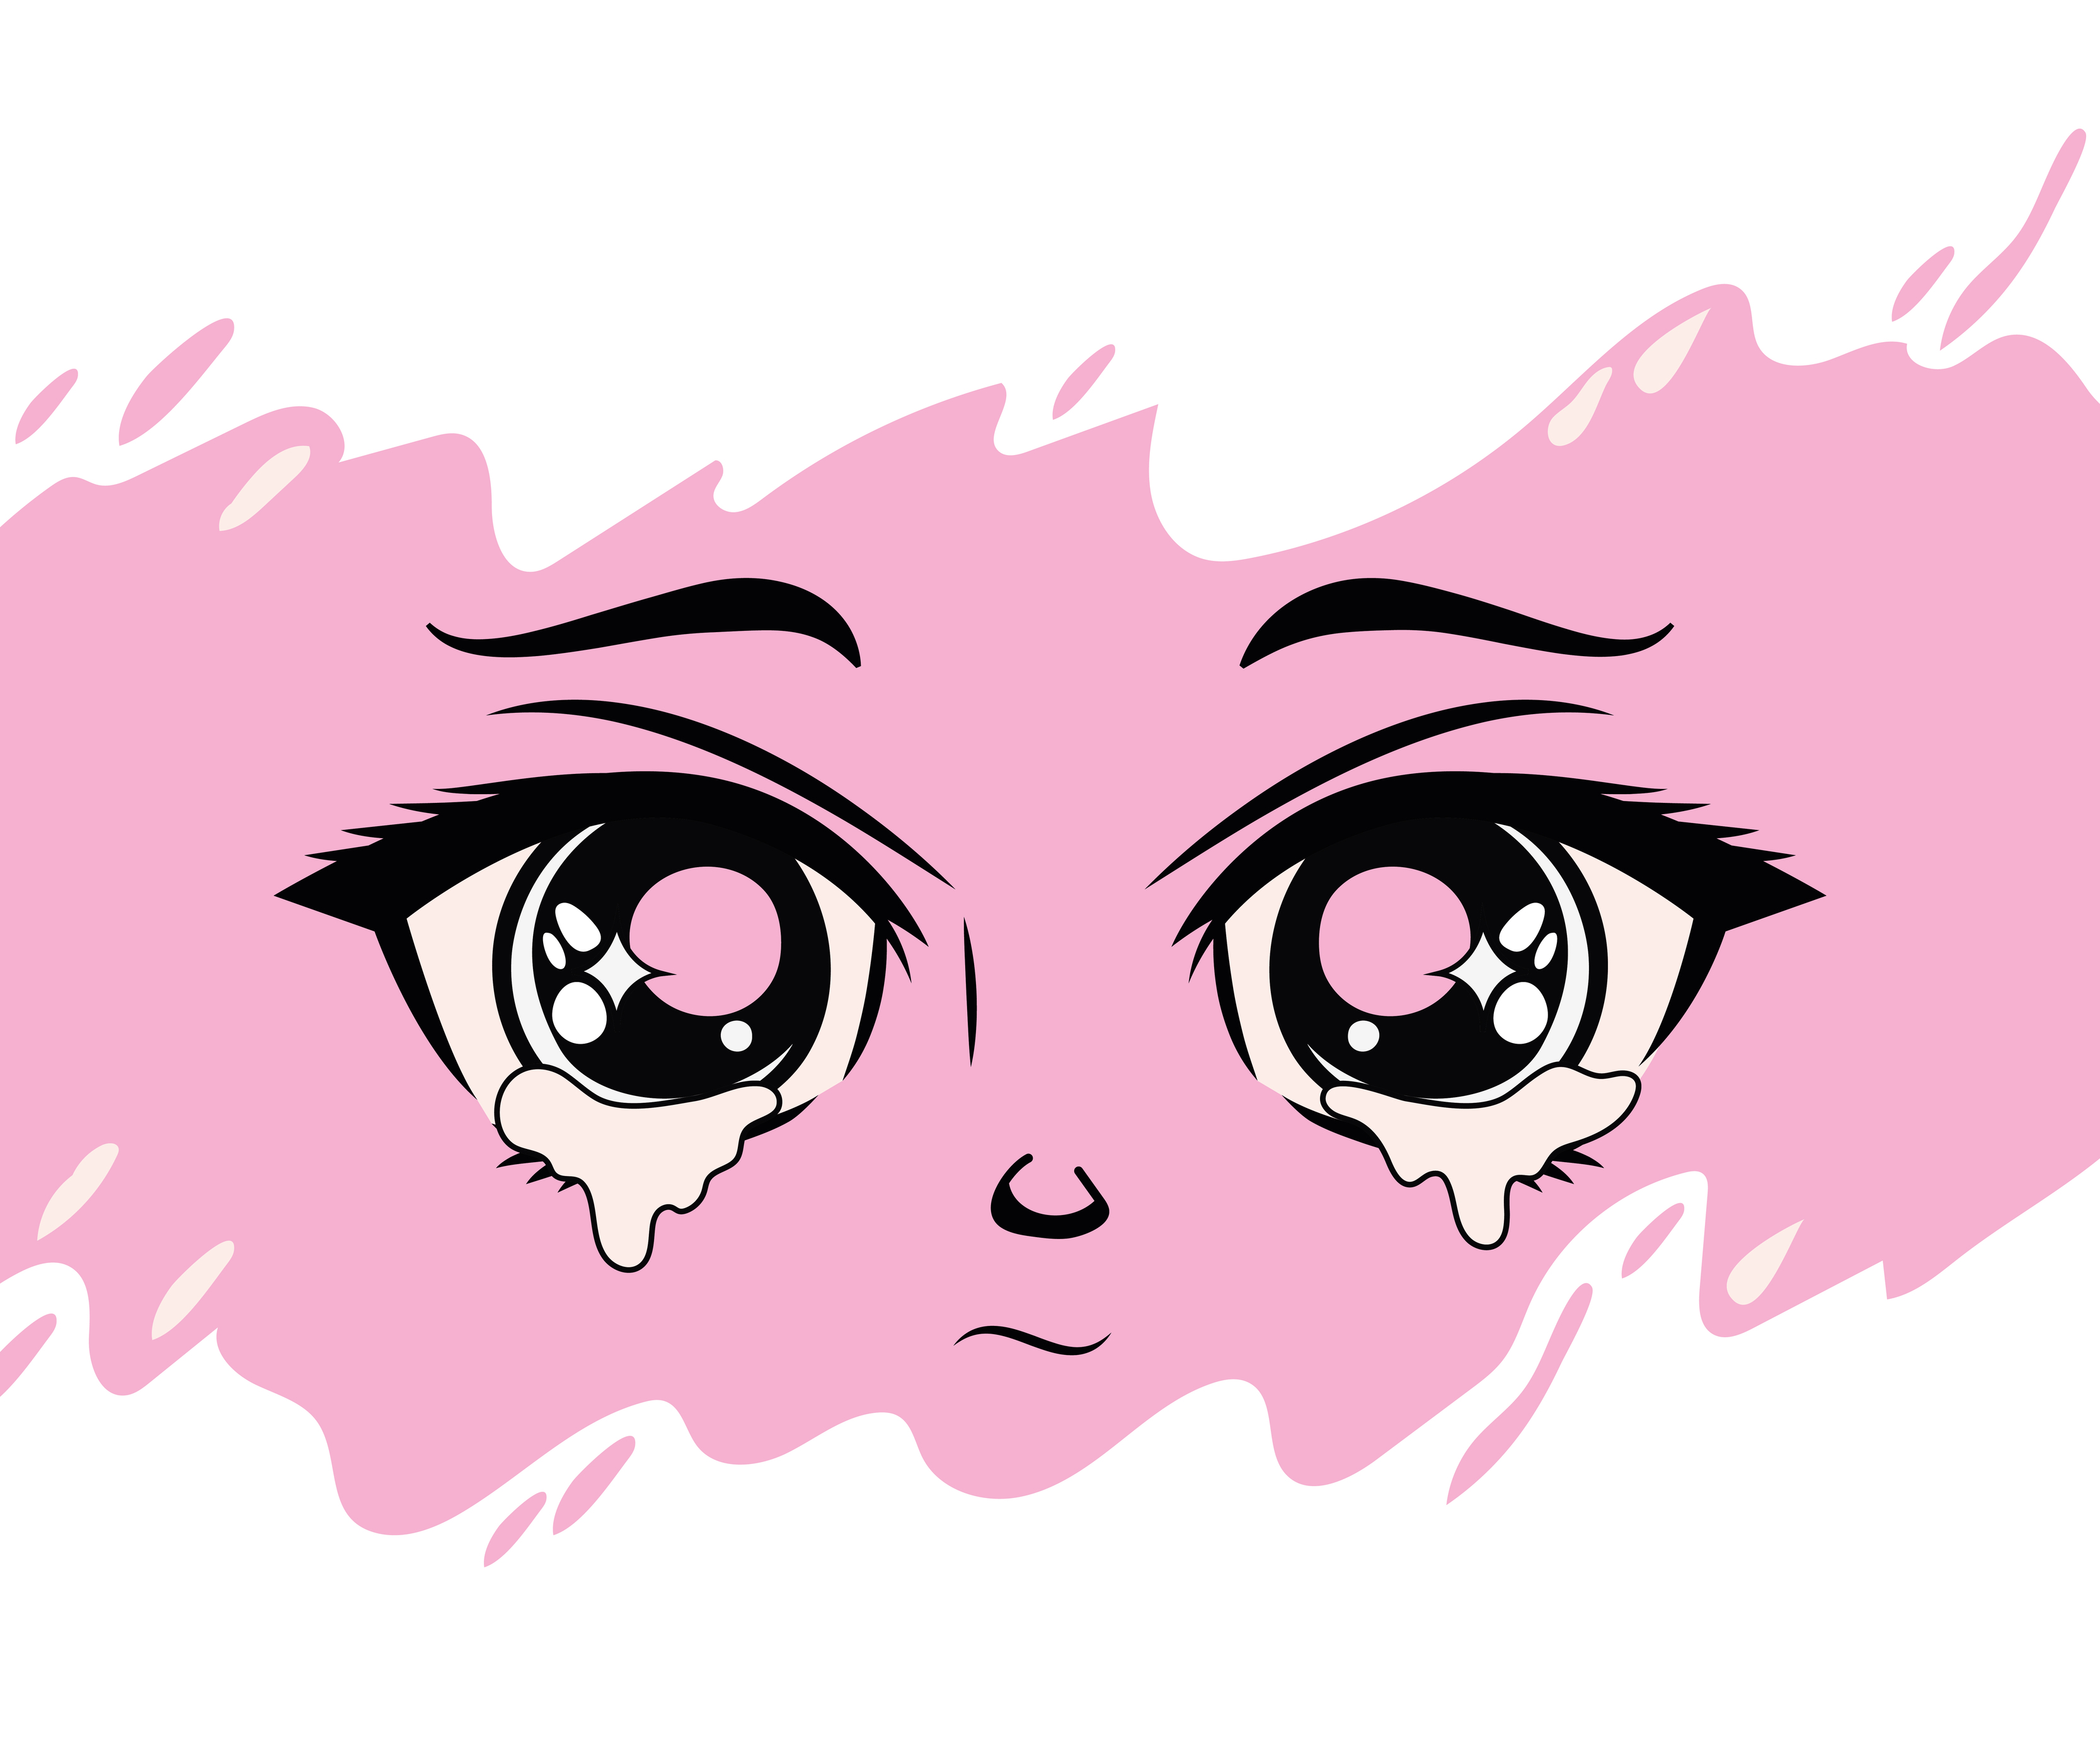 Closed Crying Anime Eyes, HD Png Download , Transparent Png Image - PNGitem